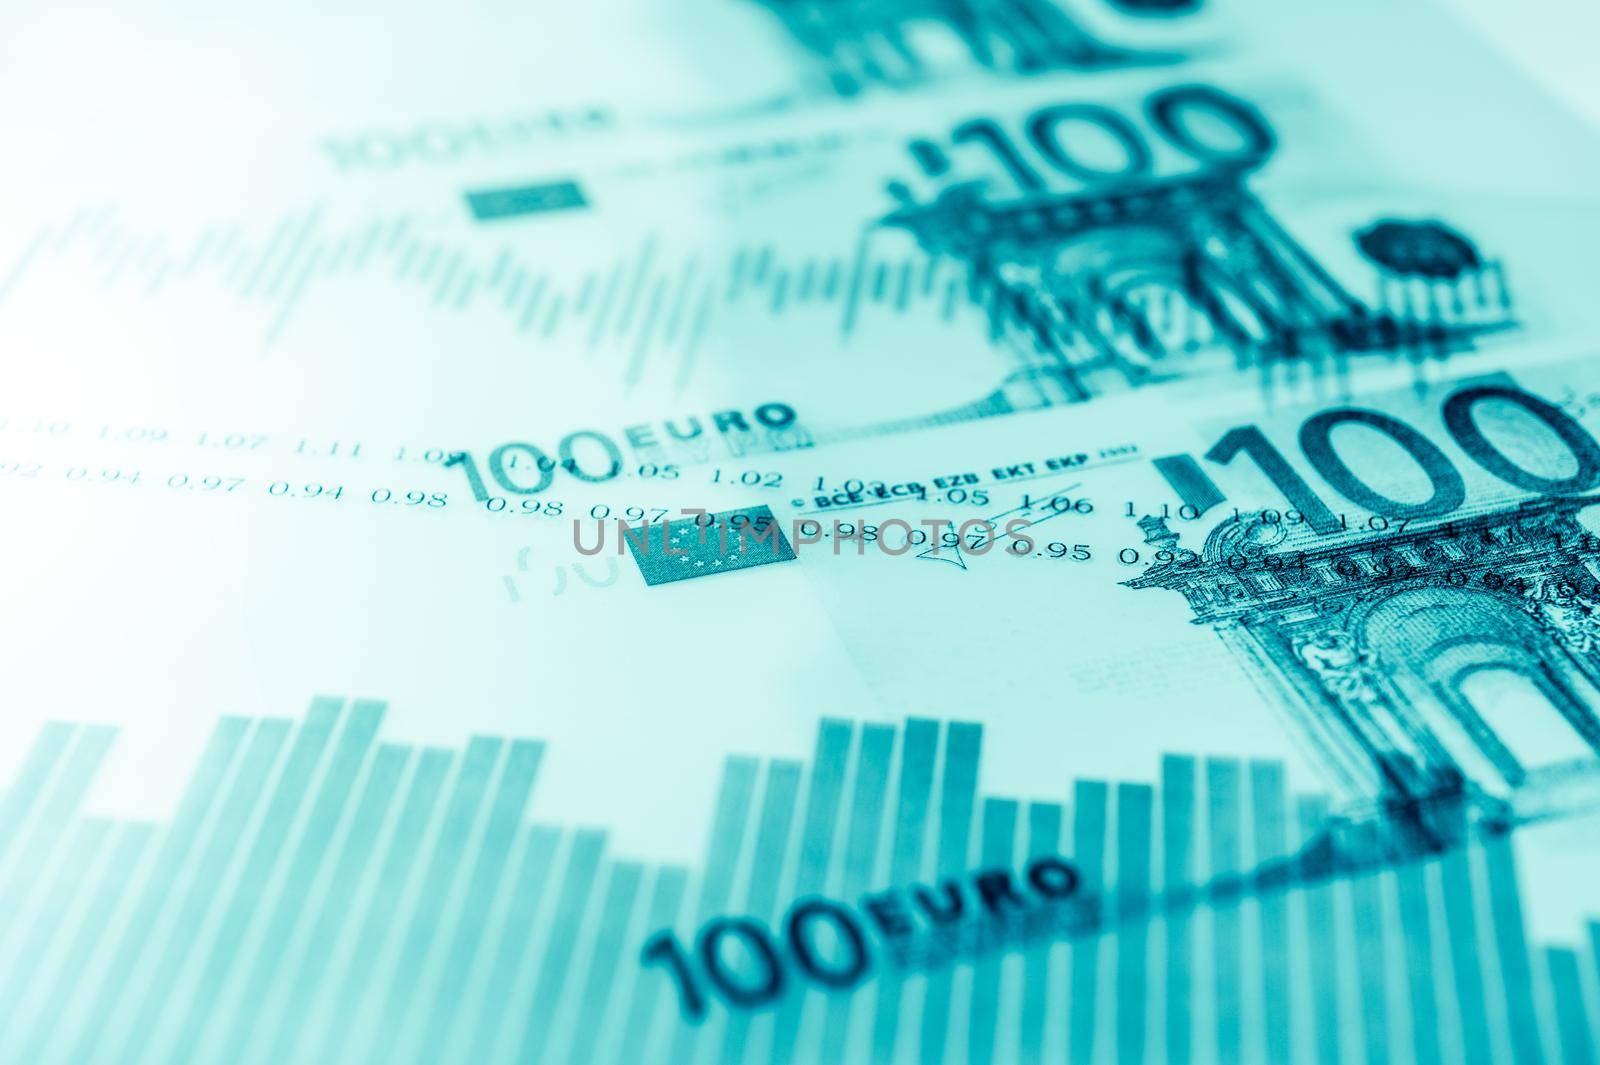 Double exposure Stock market display or forex trading graph and candlestick chart on euro banknote by bashta